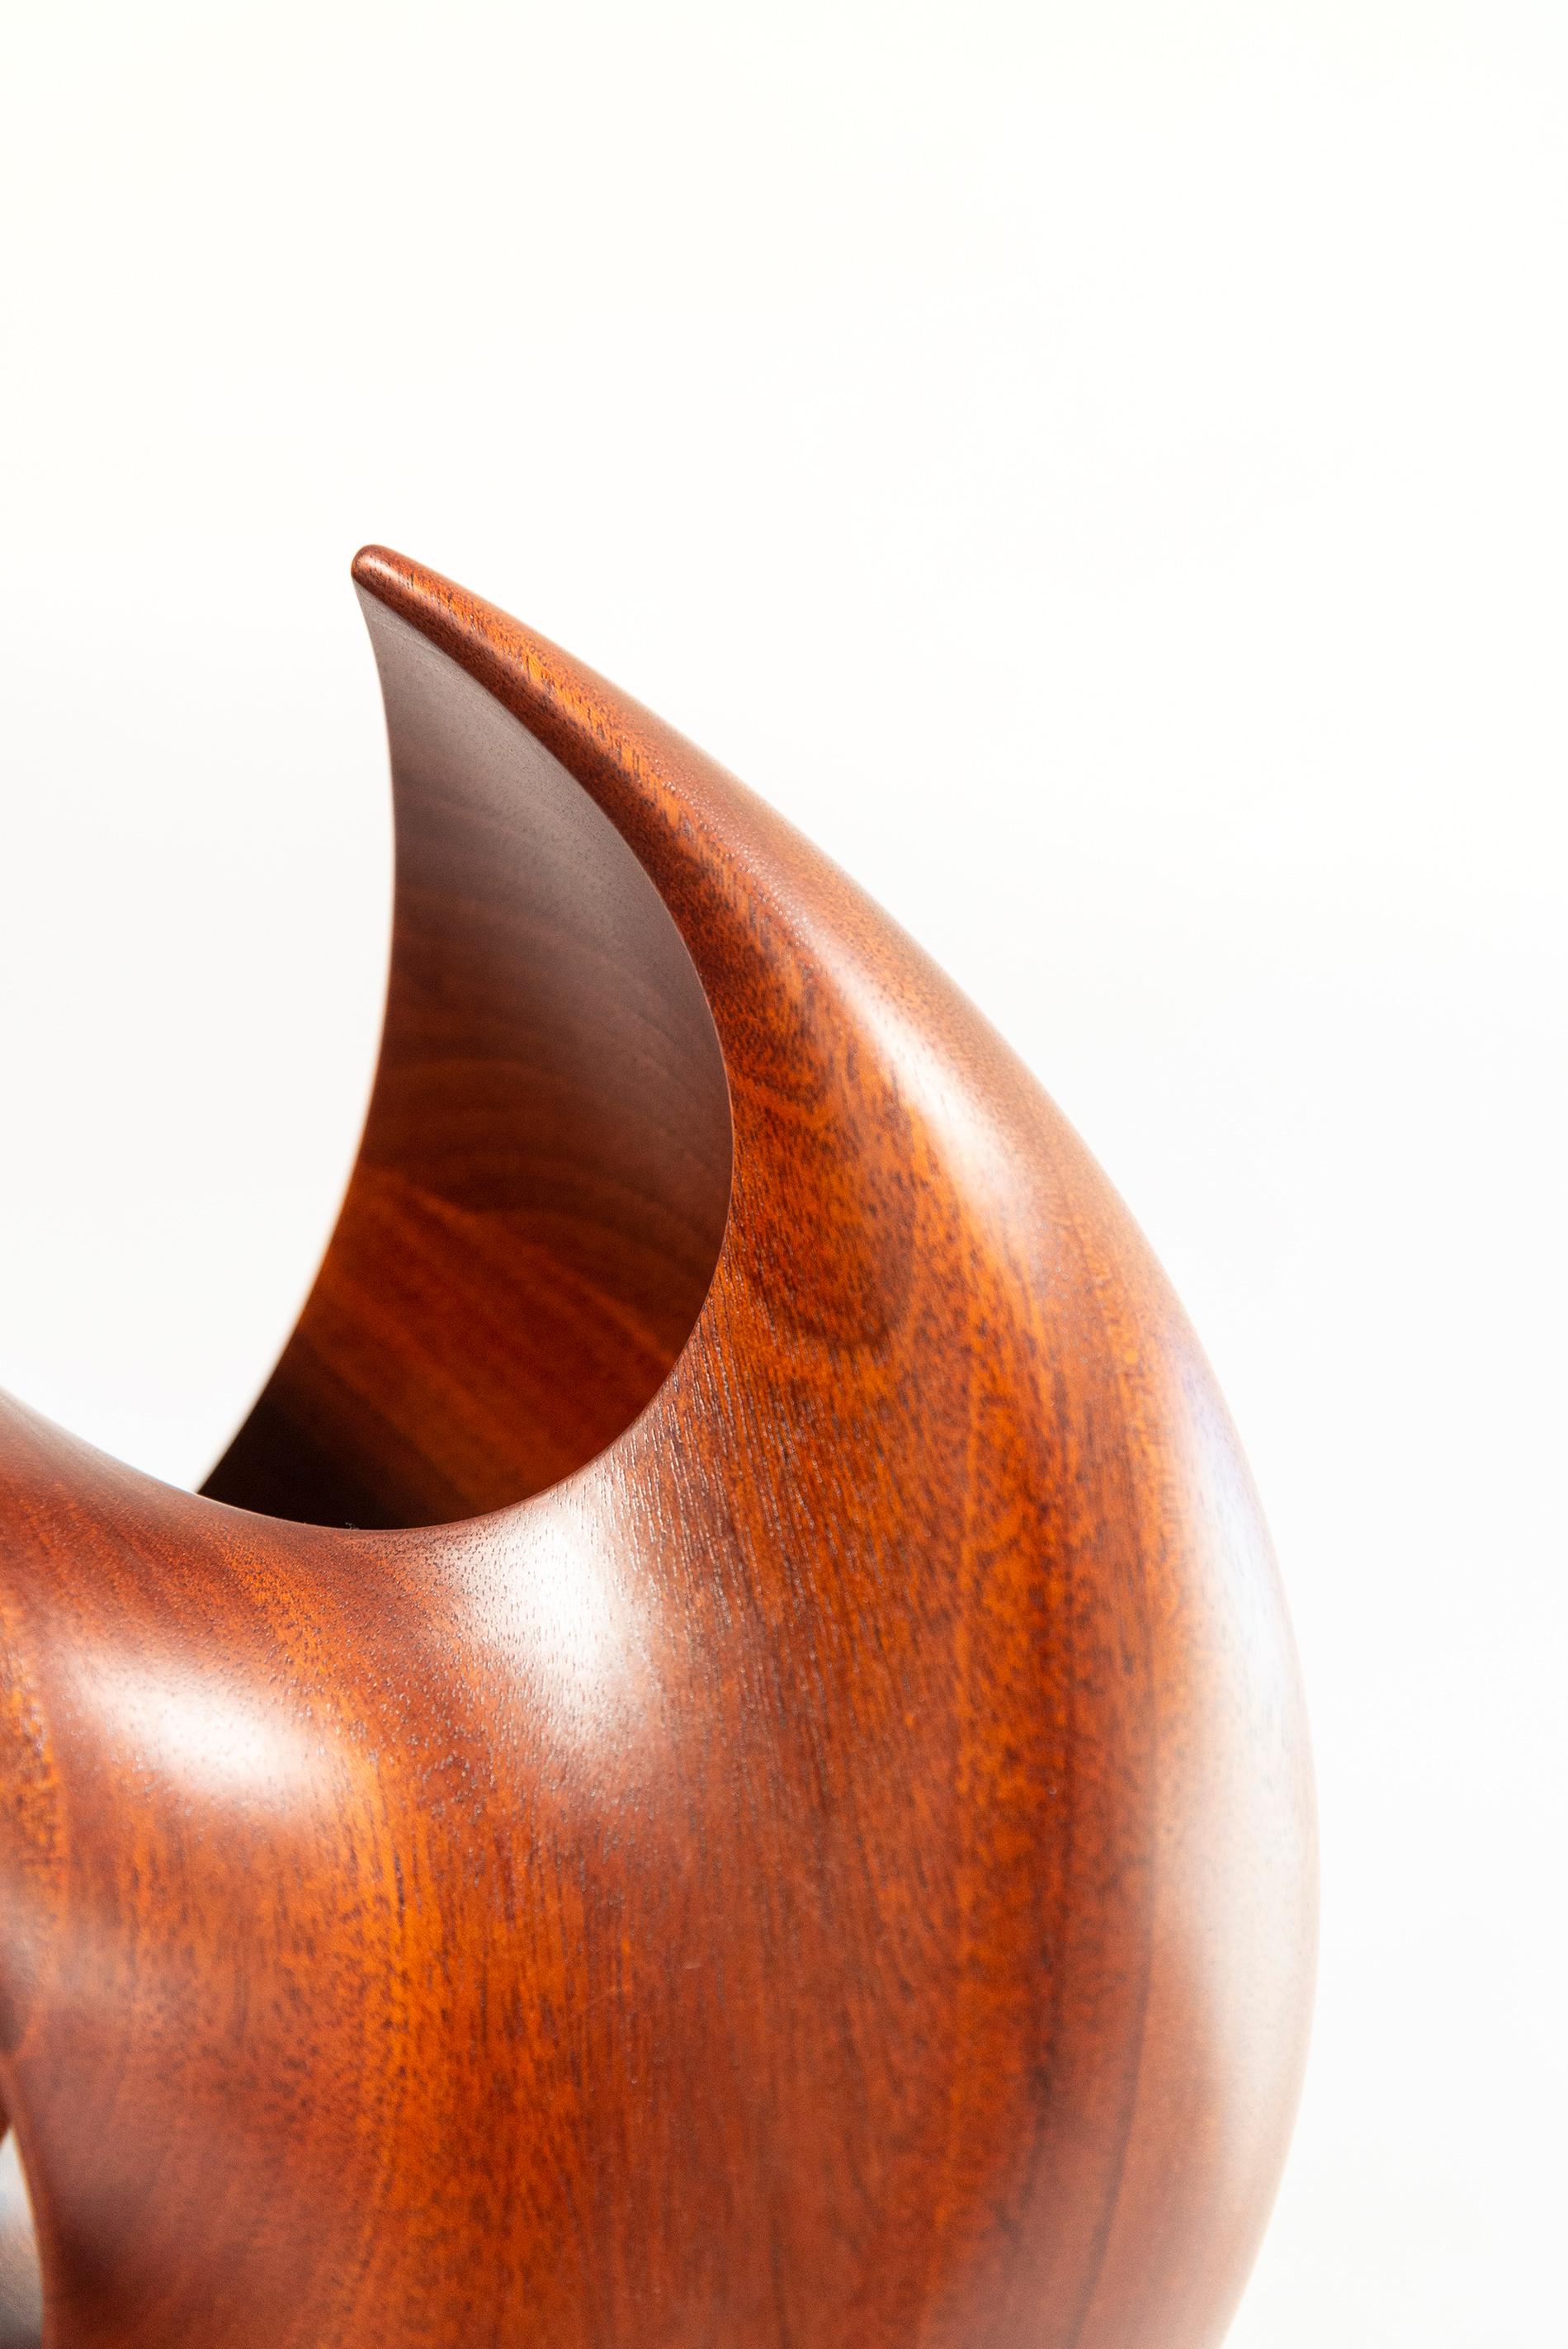 Senza Misura - smooth, polished, abstract, contemporary, mahogany sculpture For Sale 11